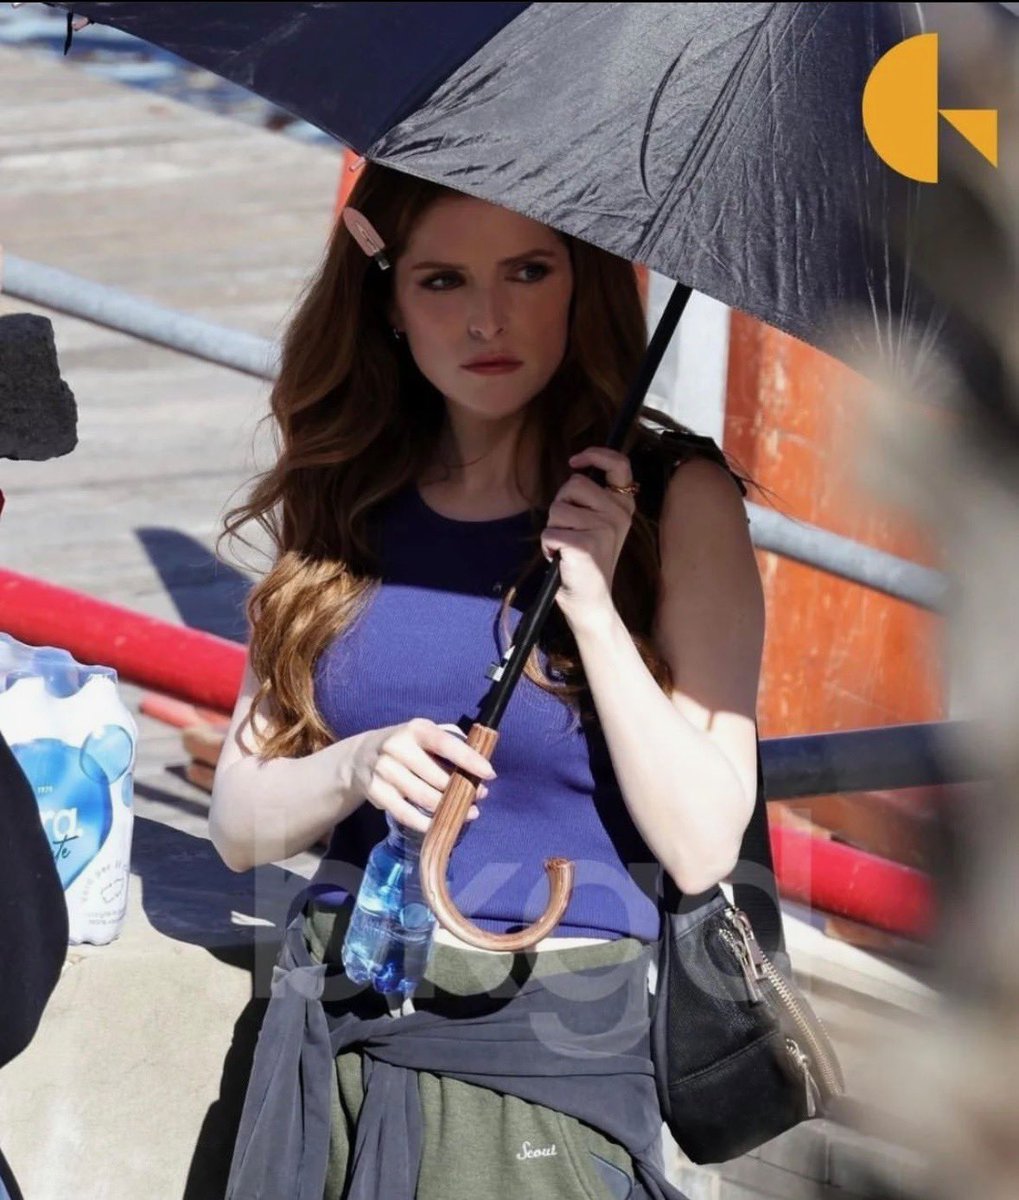 📸 | New photo of Anna Kendrick (@AnnaKendrick47) during the filming of 'A Simple Favor 2' in Italy.